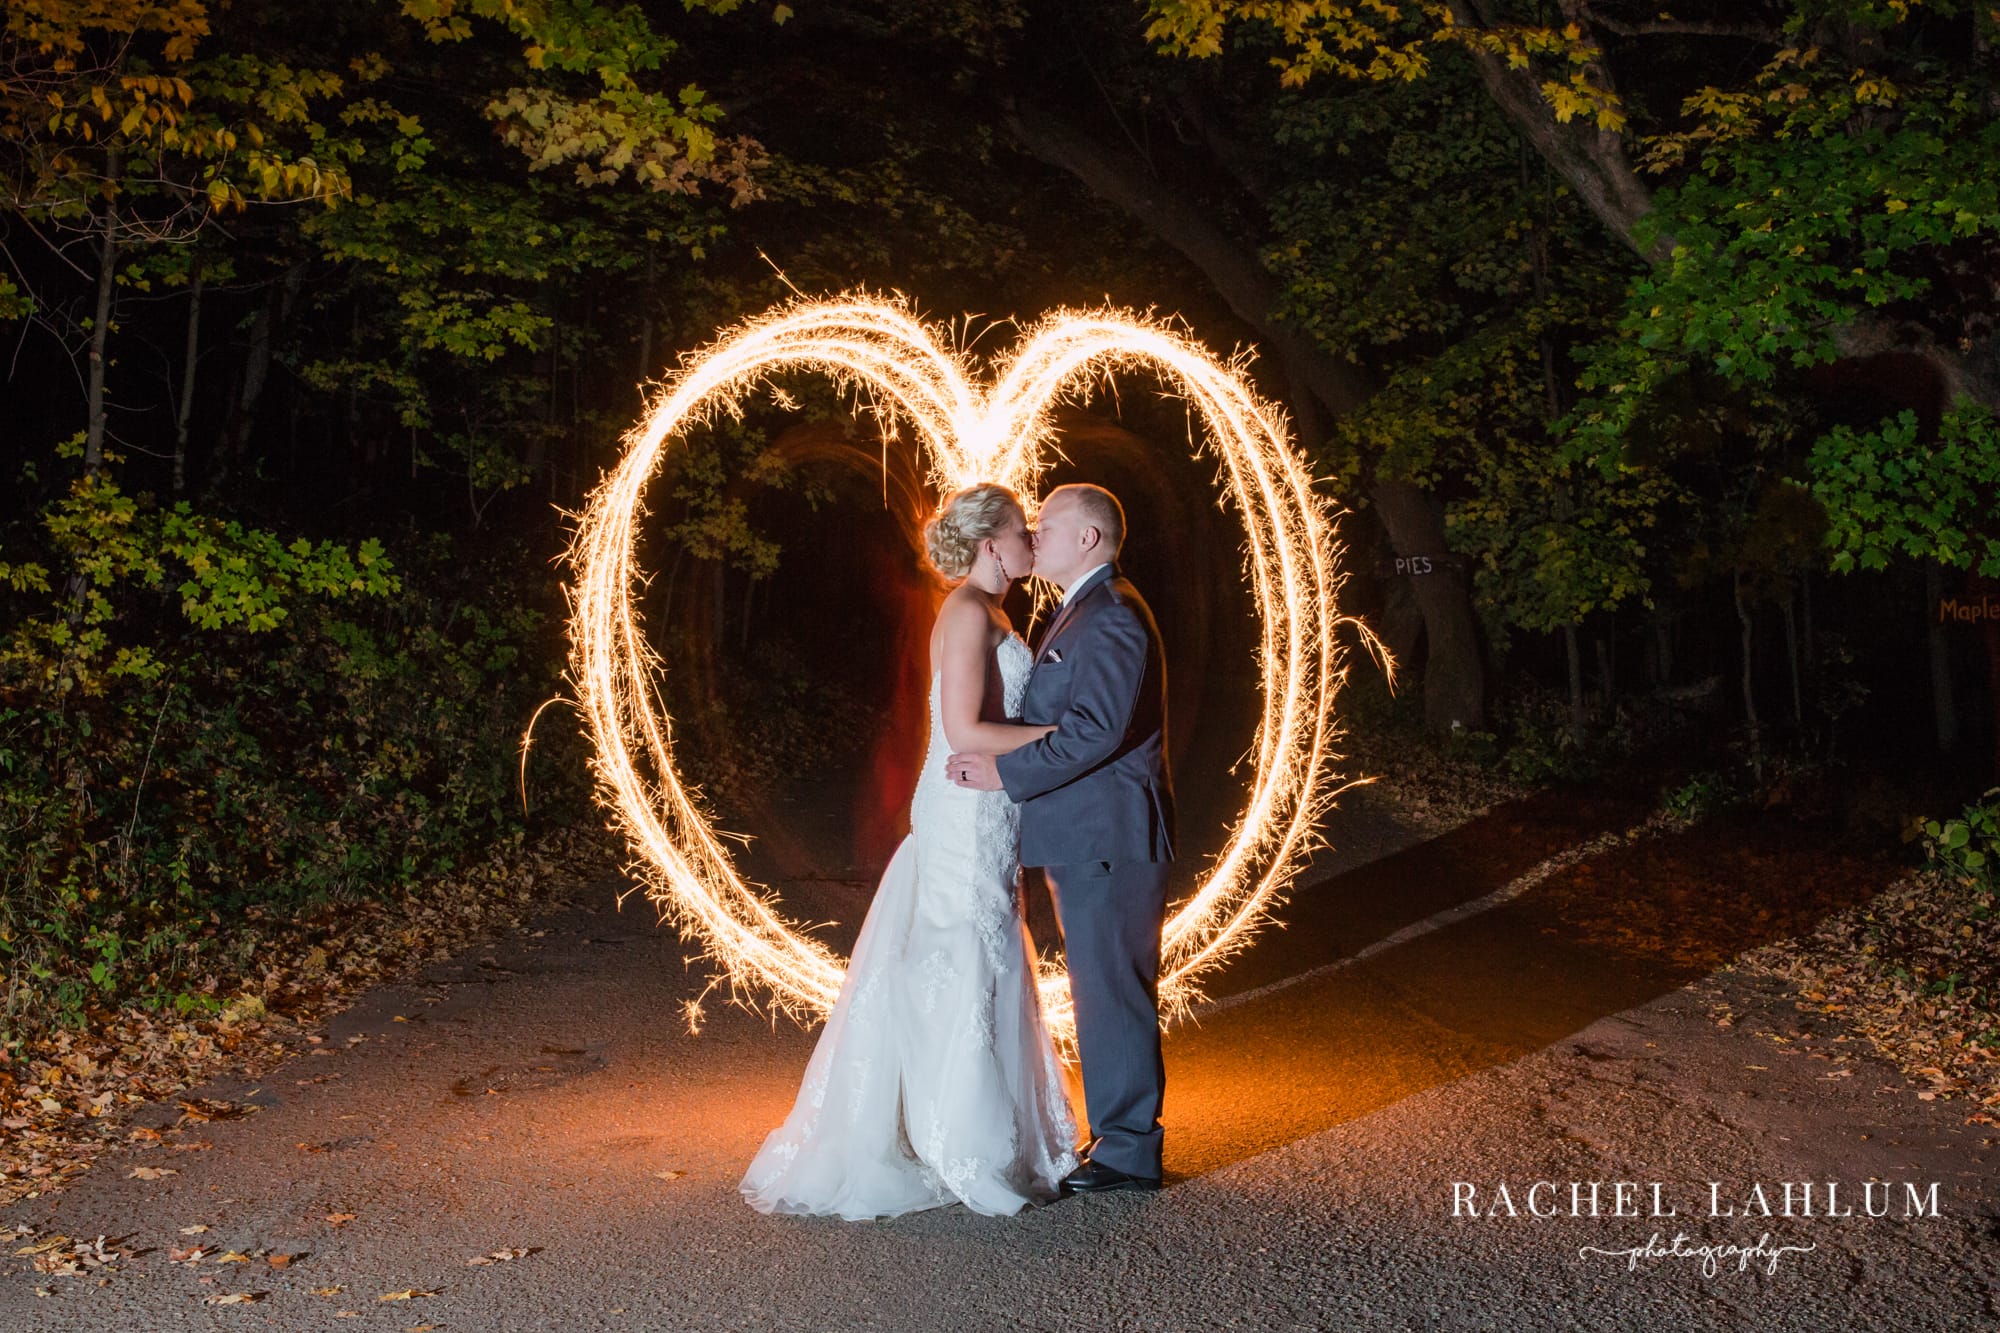 Light painting a heart around a newlywed couple. 